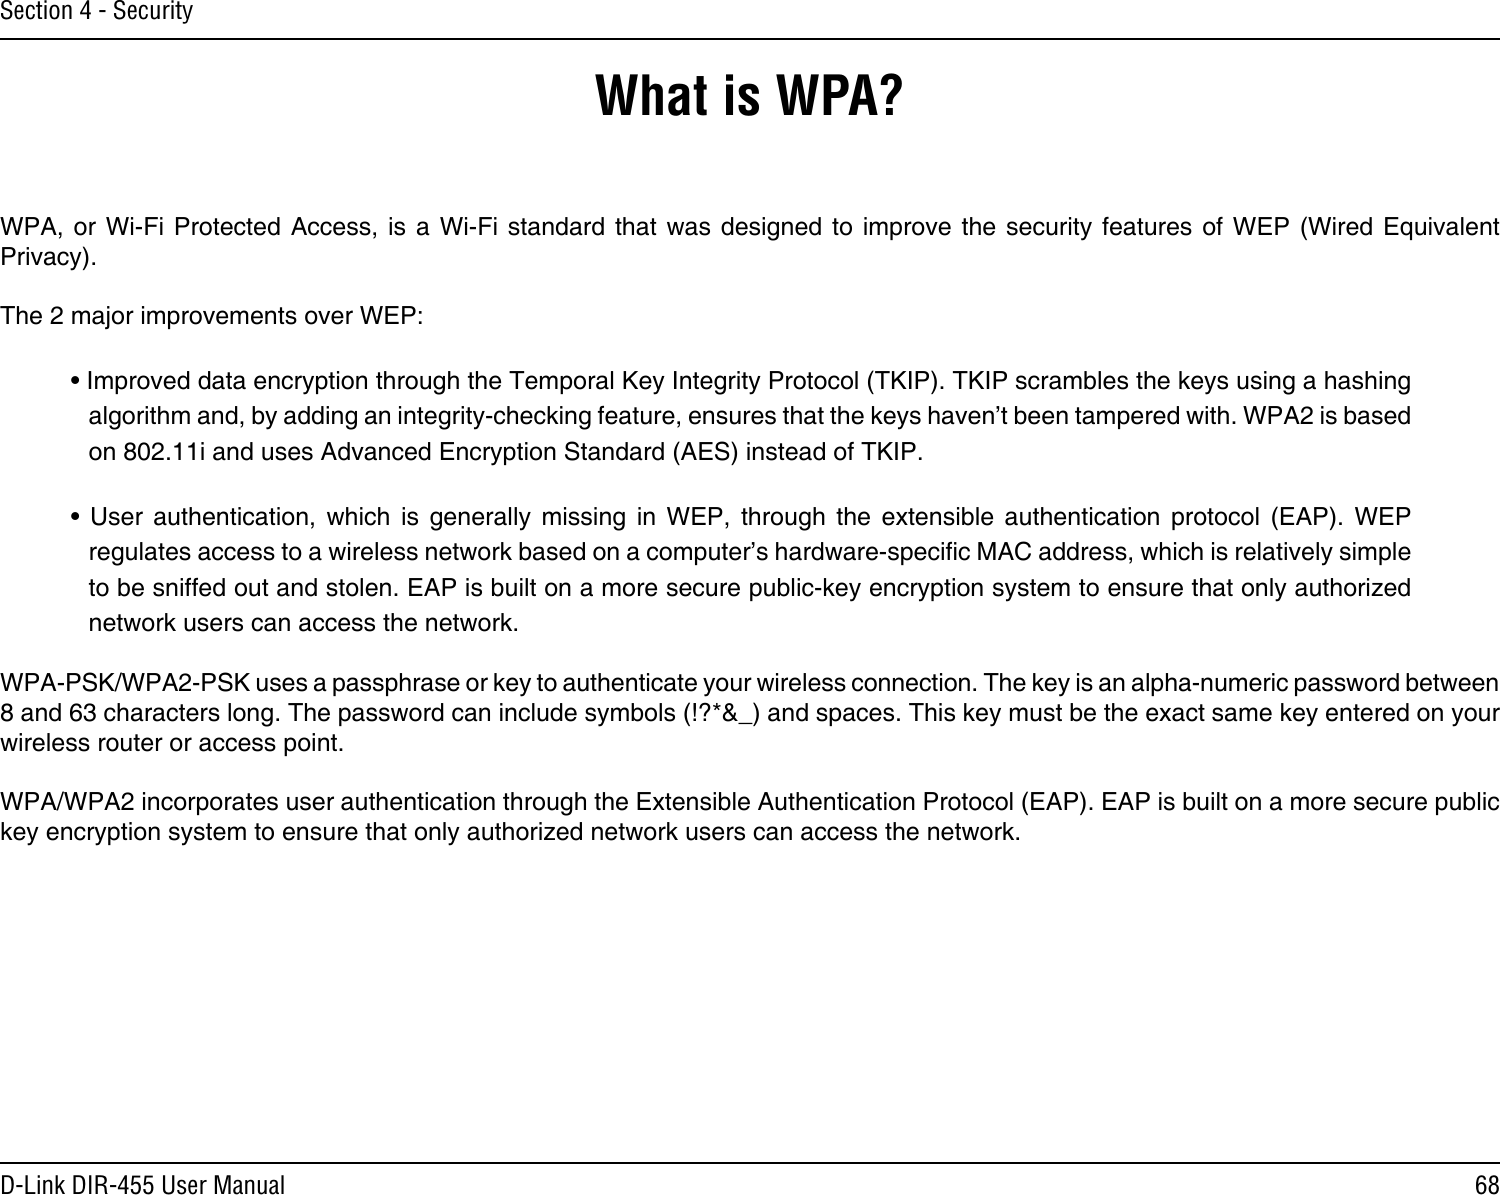 68D-Link DIR-455 User ManualSection 4 - SecurityWhat is WPA?WPA, or  Wi-Fi Protected Access,  is a  Wi-Fi  standard that  was designed  to  improve the  security  features of  WEP (Wired Equivalent Privacy).  The 2 major improvements over WEP: • Improved data encryption through the Temporal Key Integrity Protocol (TKIP). TKIP scrambles the keys using a hashing algorithm and, by adding an integrity-checking feature, ensures that the keys haven’t been tampered with. WPA2 is based on 802.11i and uses Advanced Encryption Standard (AES) instead of TKIP.•  User  authentication,  which  is  generally  missing  in  WEP,  through  the  extensible  authentication  protocol  (EAP).  WEP regulates access to a wireless network based on a computer’s hardware-specic MAC address, which is relatively simple to be sniffed out and stolen. EAP is built on a more secure public-key encryption system to ensure that only authorized network users can access the network.WPA-PSK/WPA2-PSK uses a passphrase or key to authenticate your wireless connection. The key is an alpha-numeric password between 8 and 63 characters long. The password can include symbols (!?*&amp;_) and spaces. This key must be the exact same key entered on your wireless router or access point.WPA/WPA2 incorporates user authentication through the Extensible Authentication Protocol (EAP). EAP is built on a more secure public key encryption system to ensure that only authorized network users can access the network.